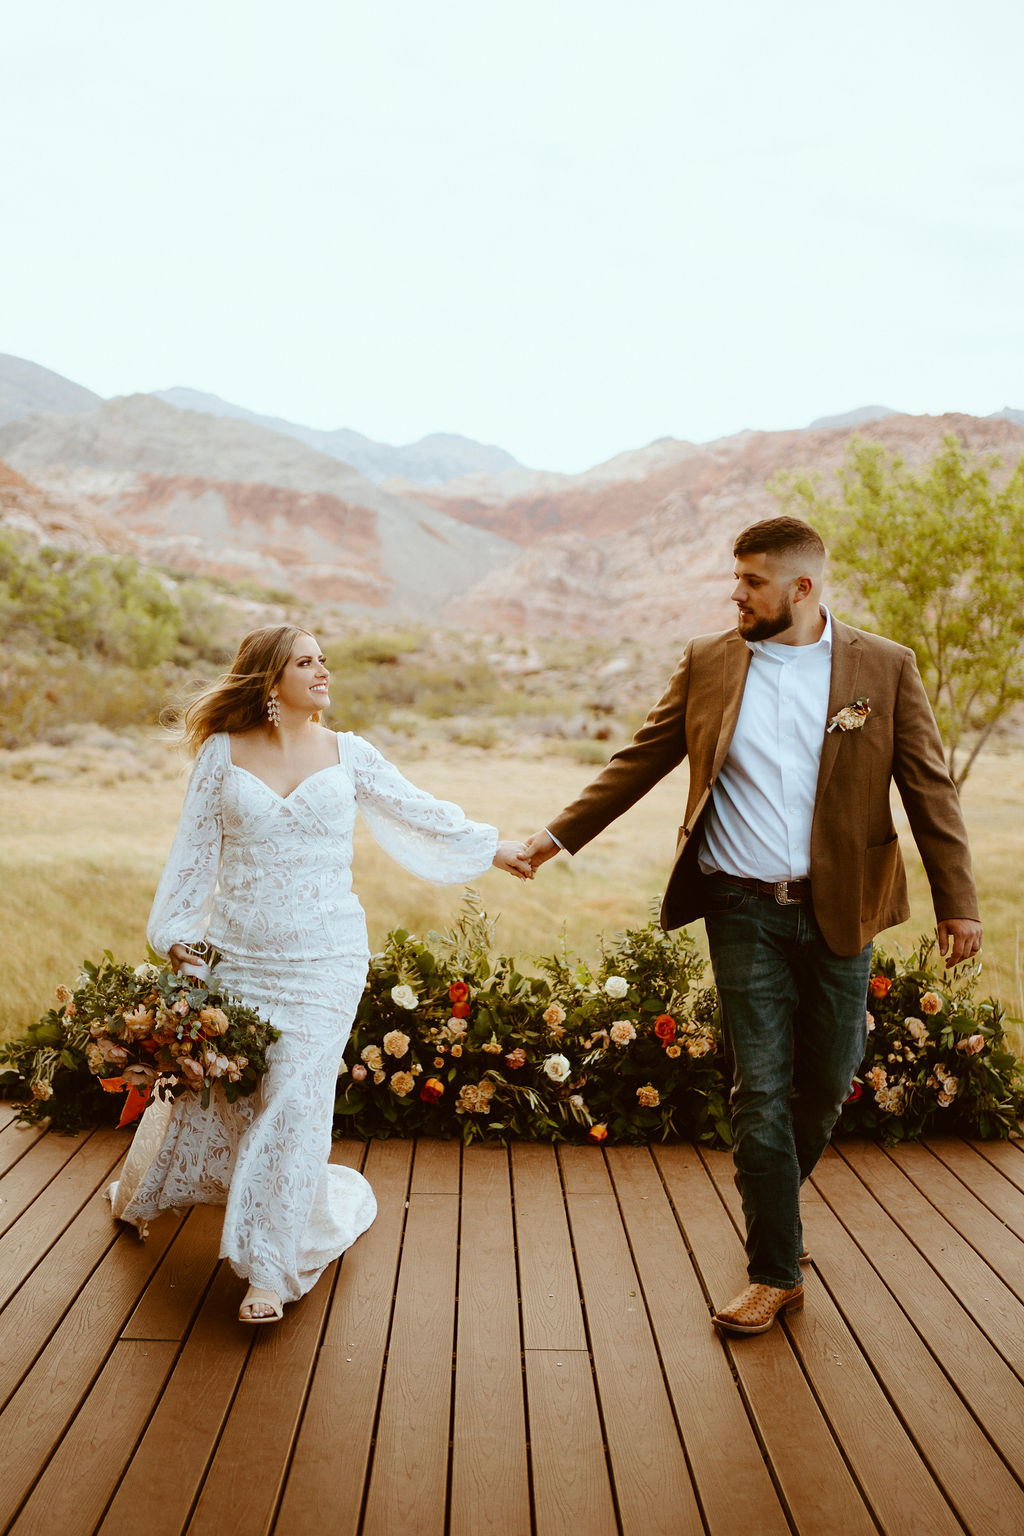 Rustic Boho Never Looked So Good! Holding hands and walking across a wooden boardwalk. Rustic boho floral ground arch is behind the couple as she holds her rustic bridal bouquet. 